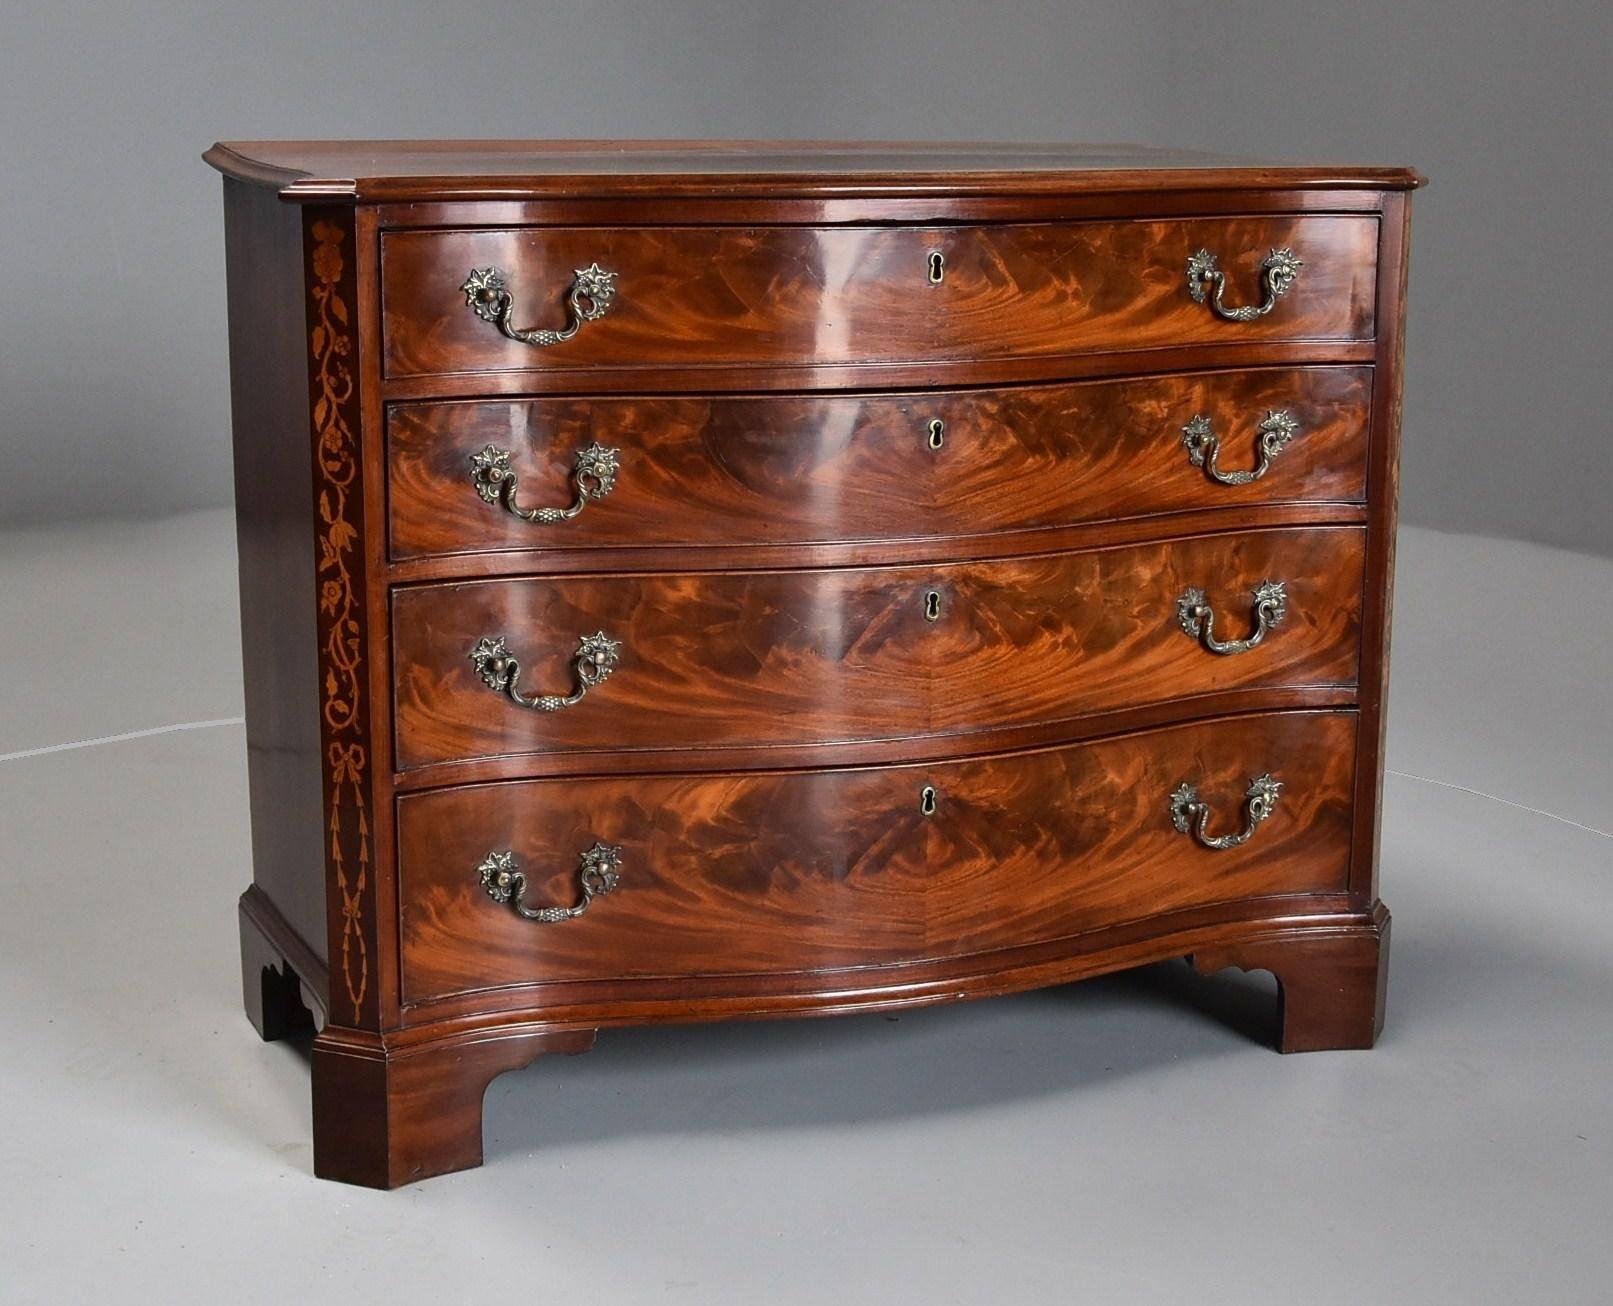 Superb Quality 19th Century Mahogany Serpentine Chest of Drawers 1